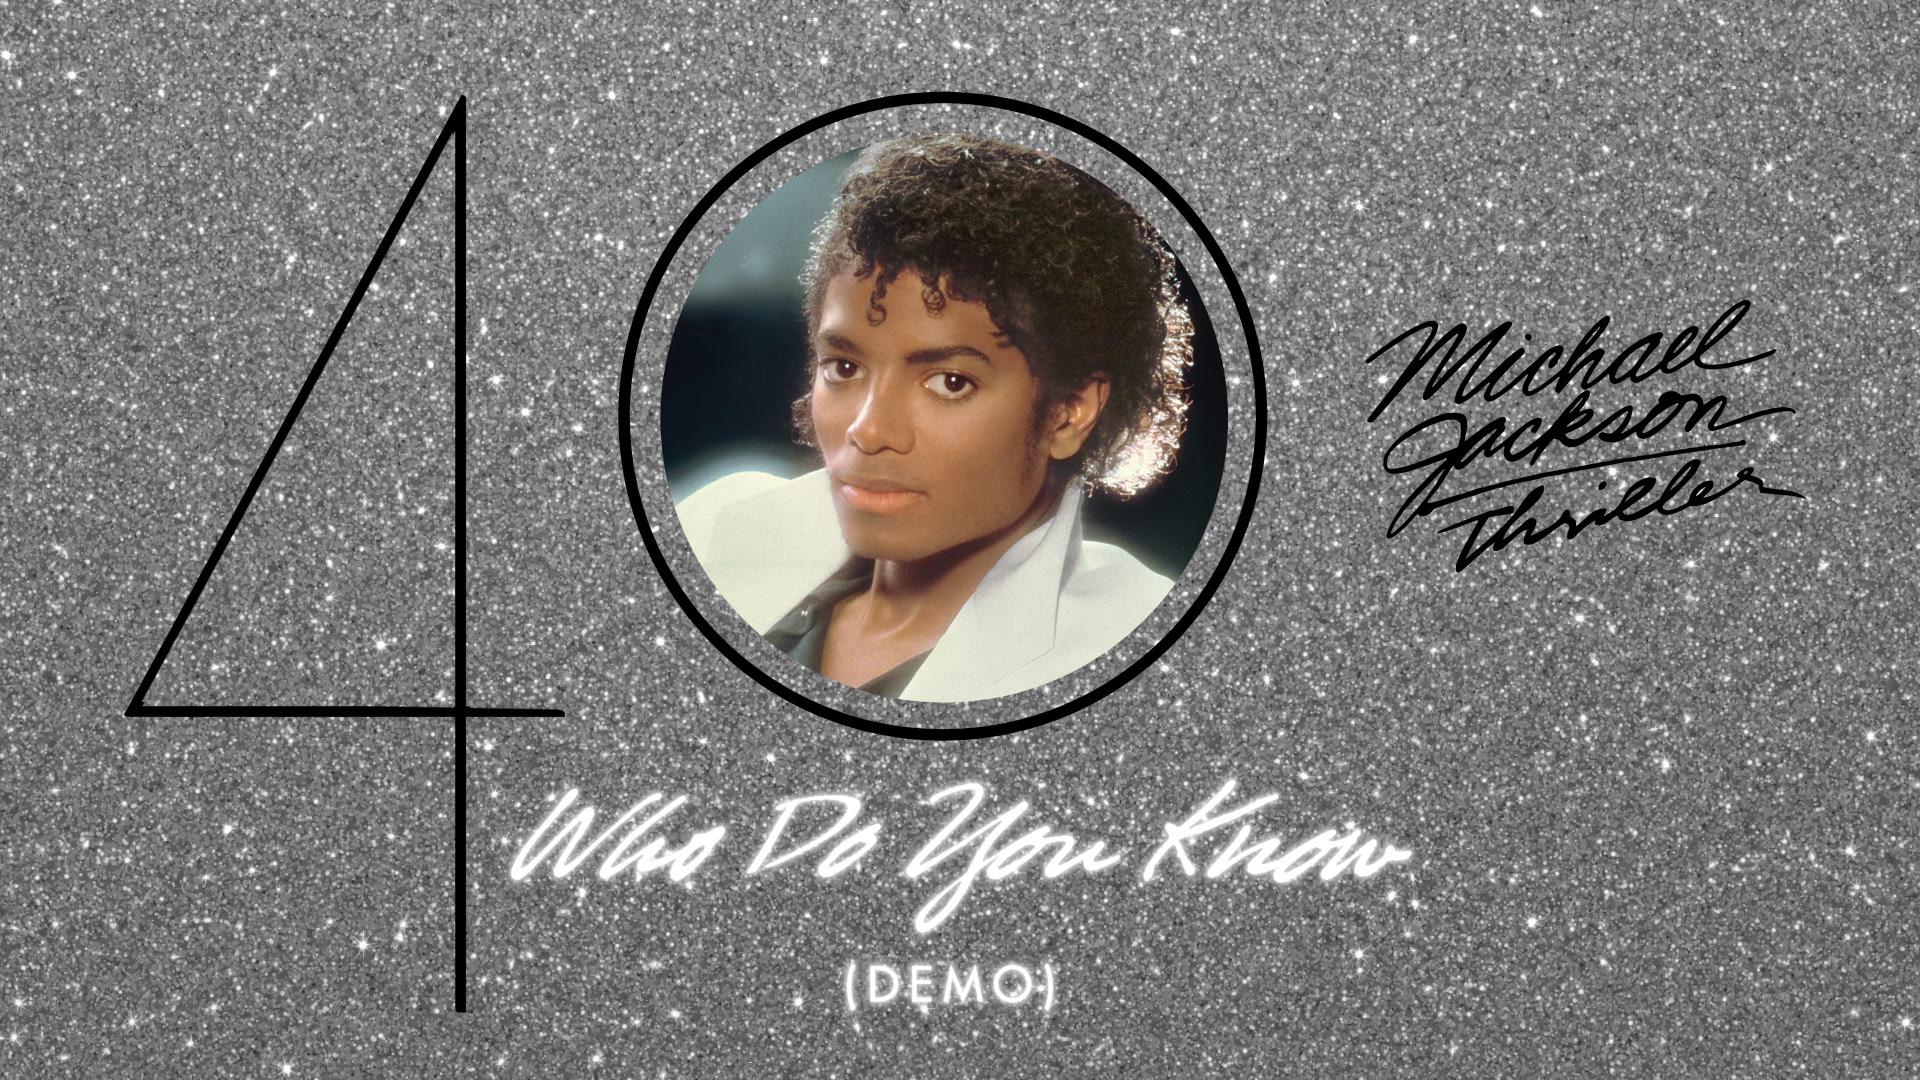 Michael Jackson - Who Do You Know (Demo - Official Audio)